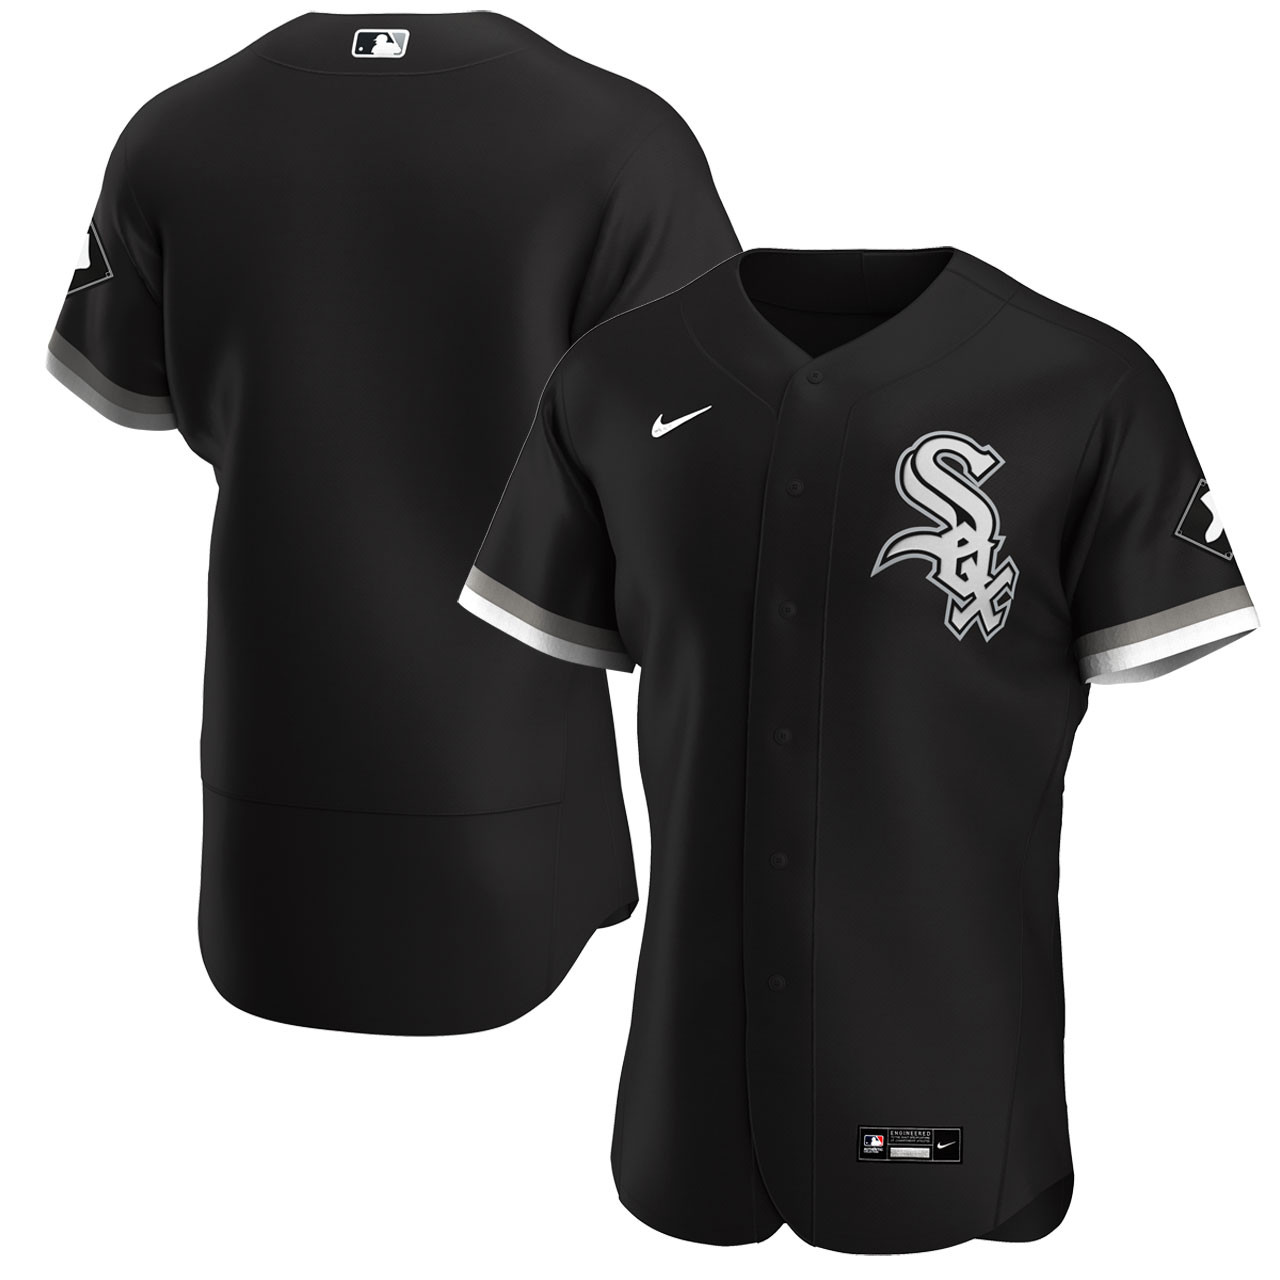 Chicago White Sox Black Alternate Authentic Jersey 2 by Nike